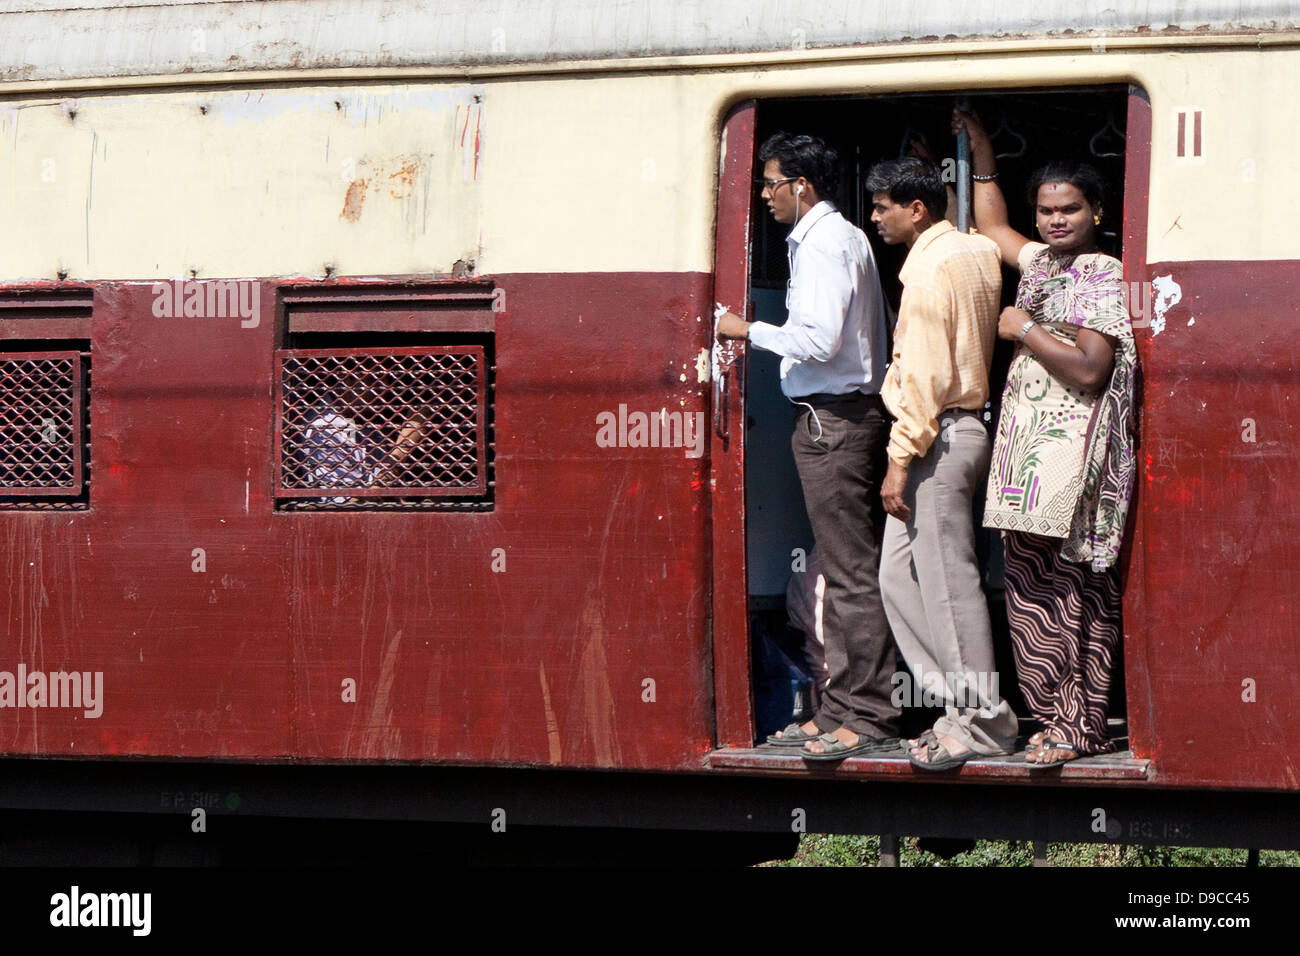 A transgender passenger on a train in India Stock Photo